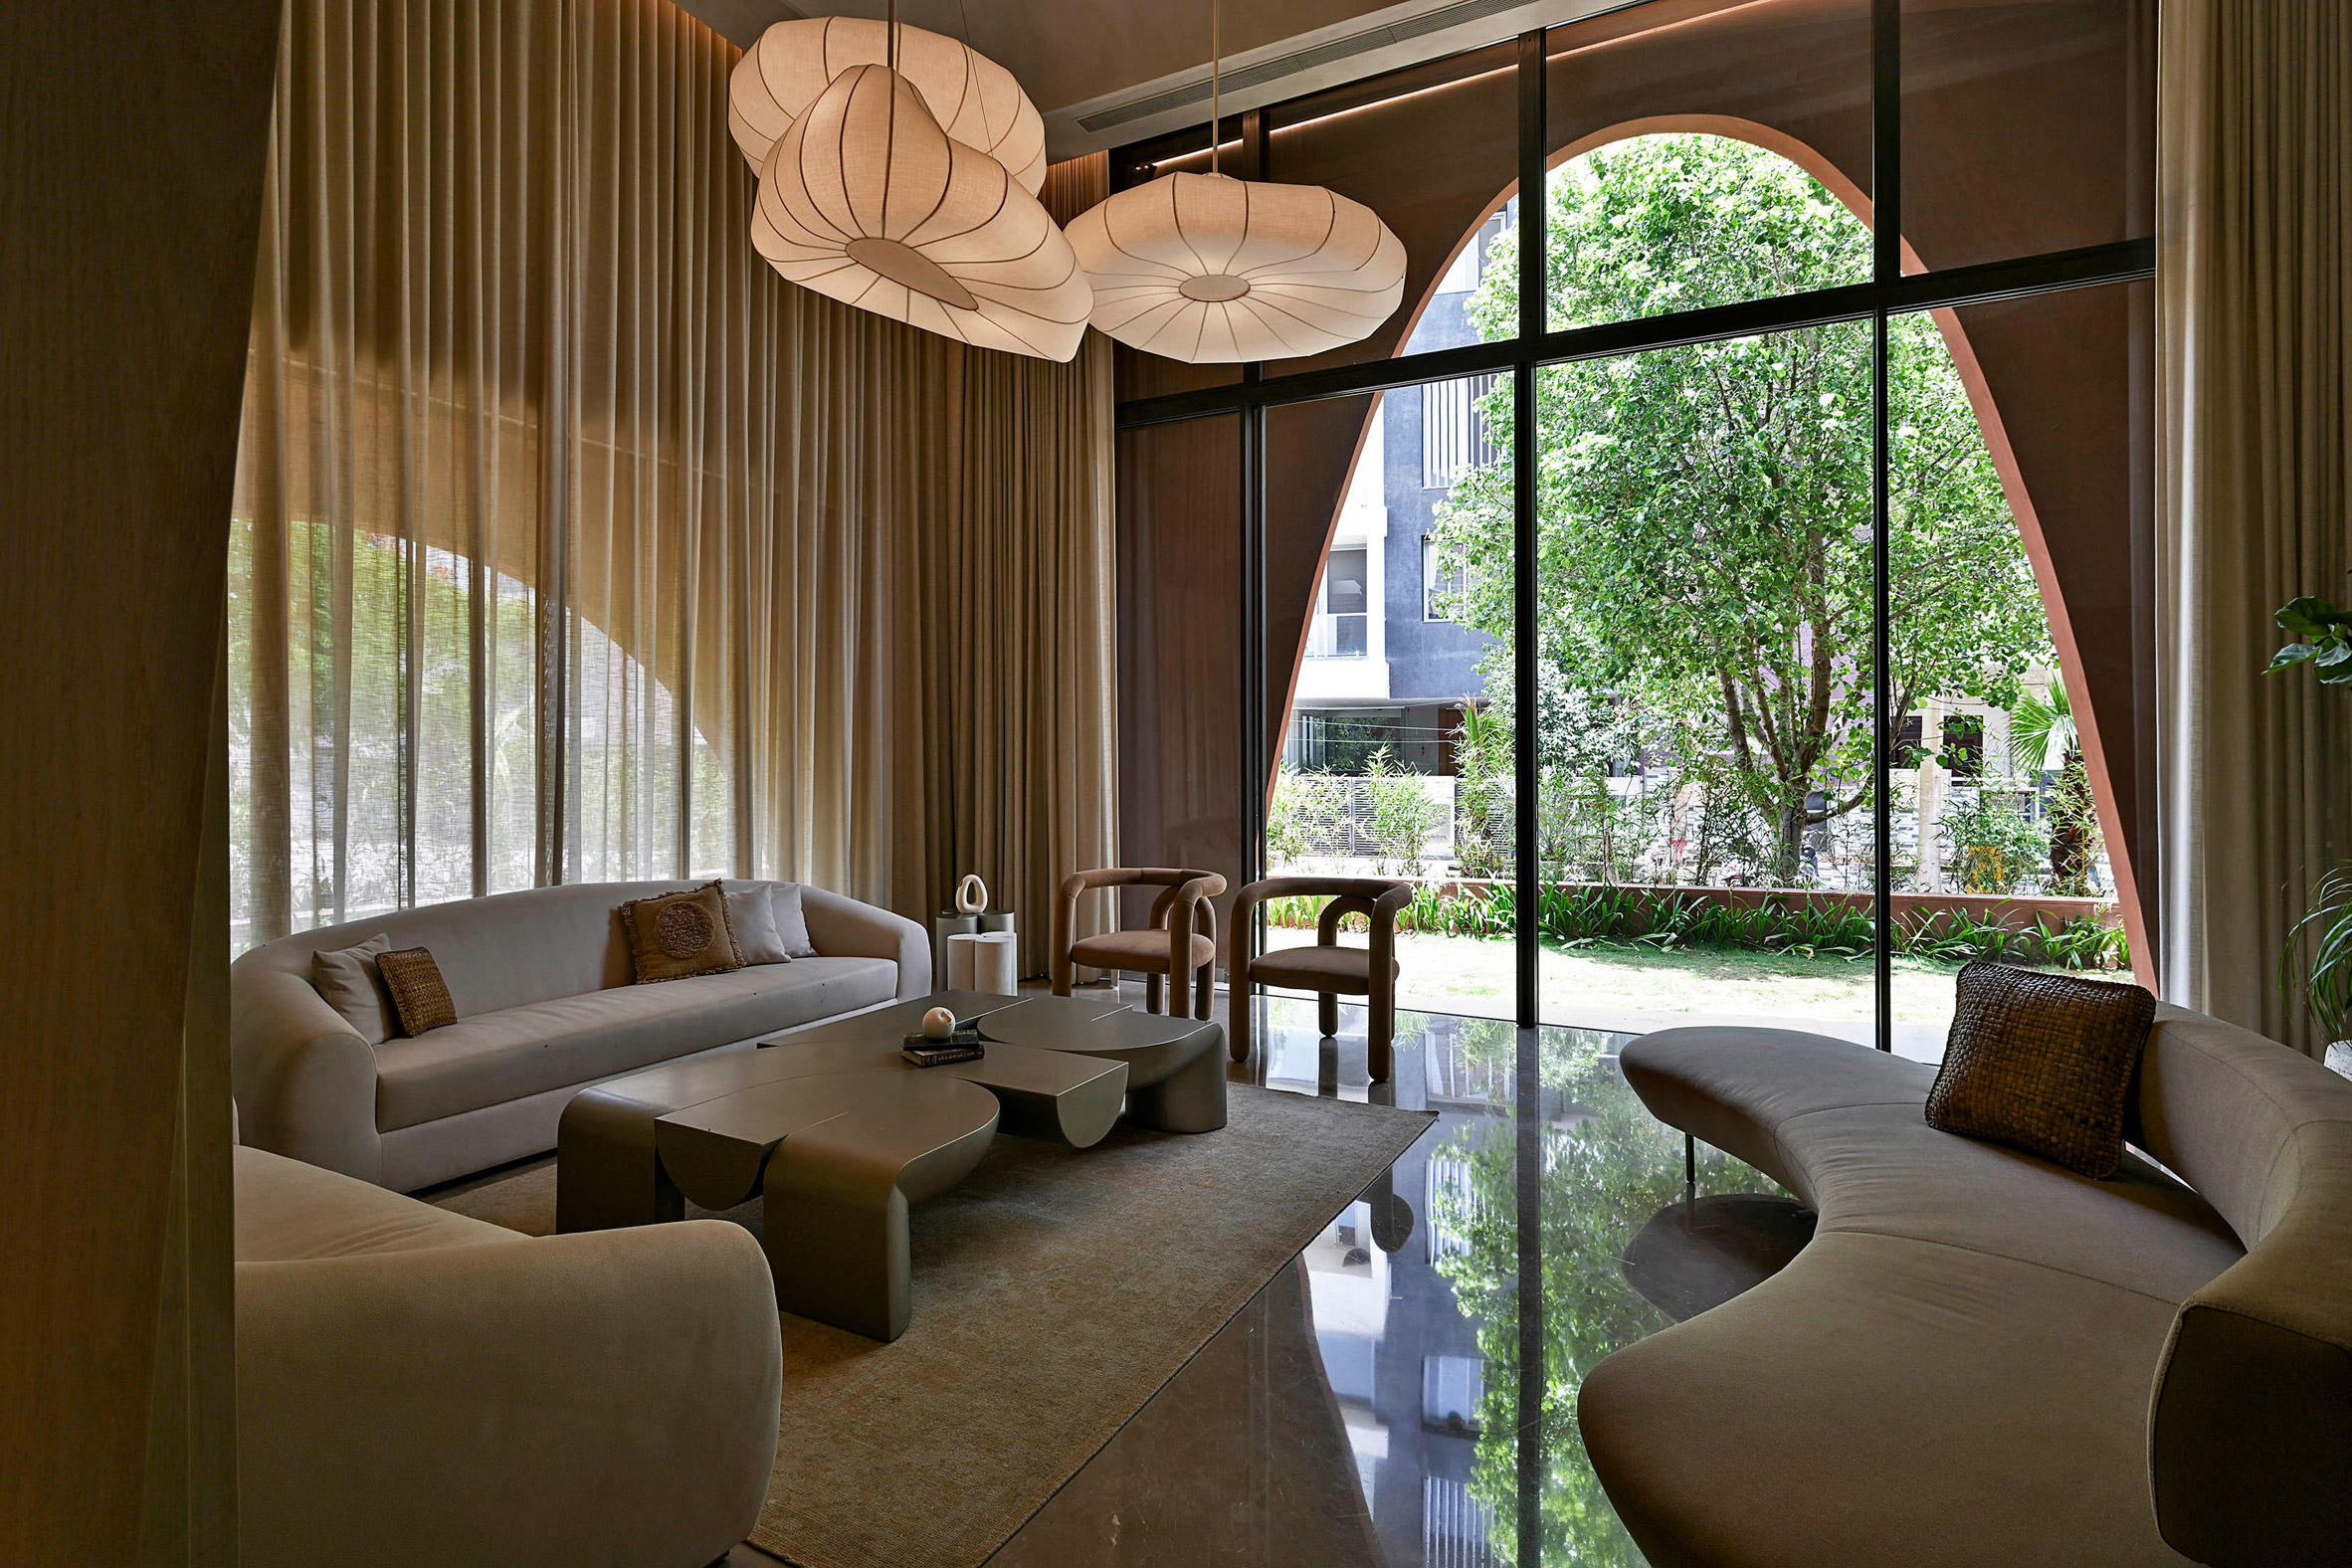 Interior image of a living space at Mirai House of Arches